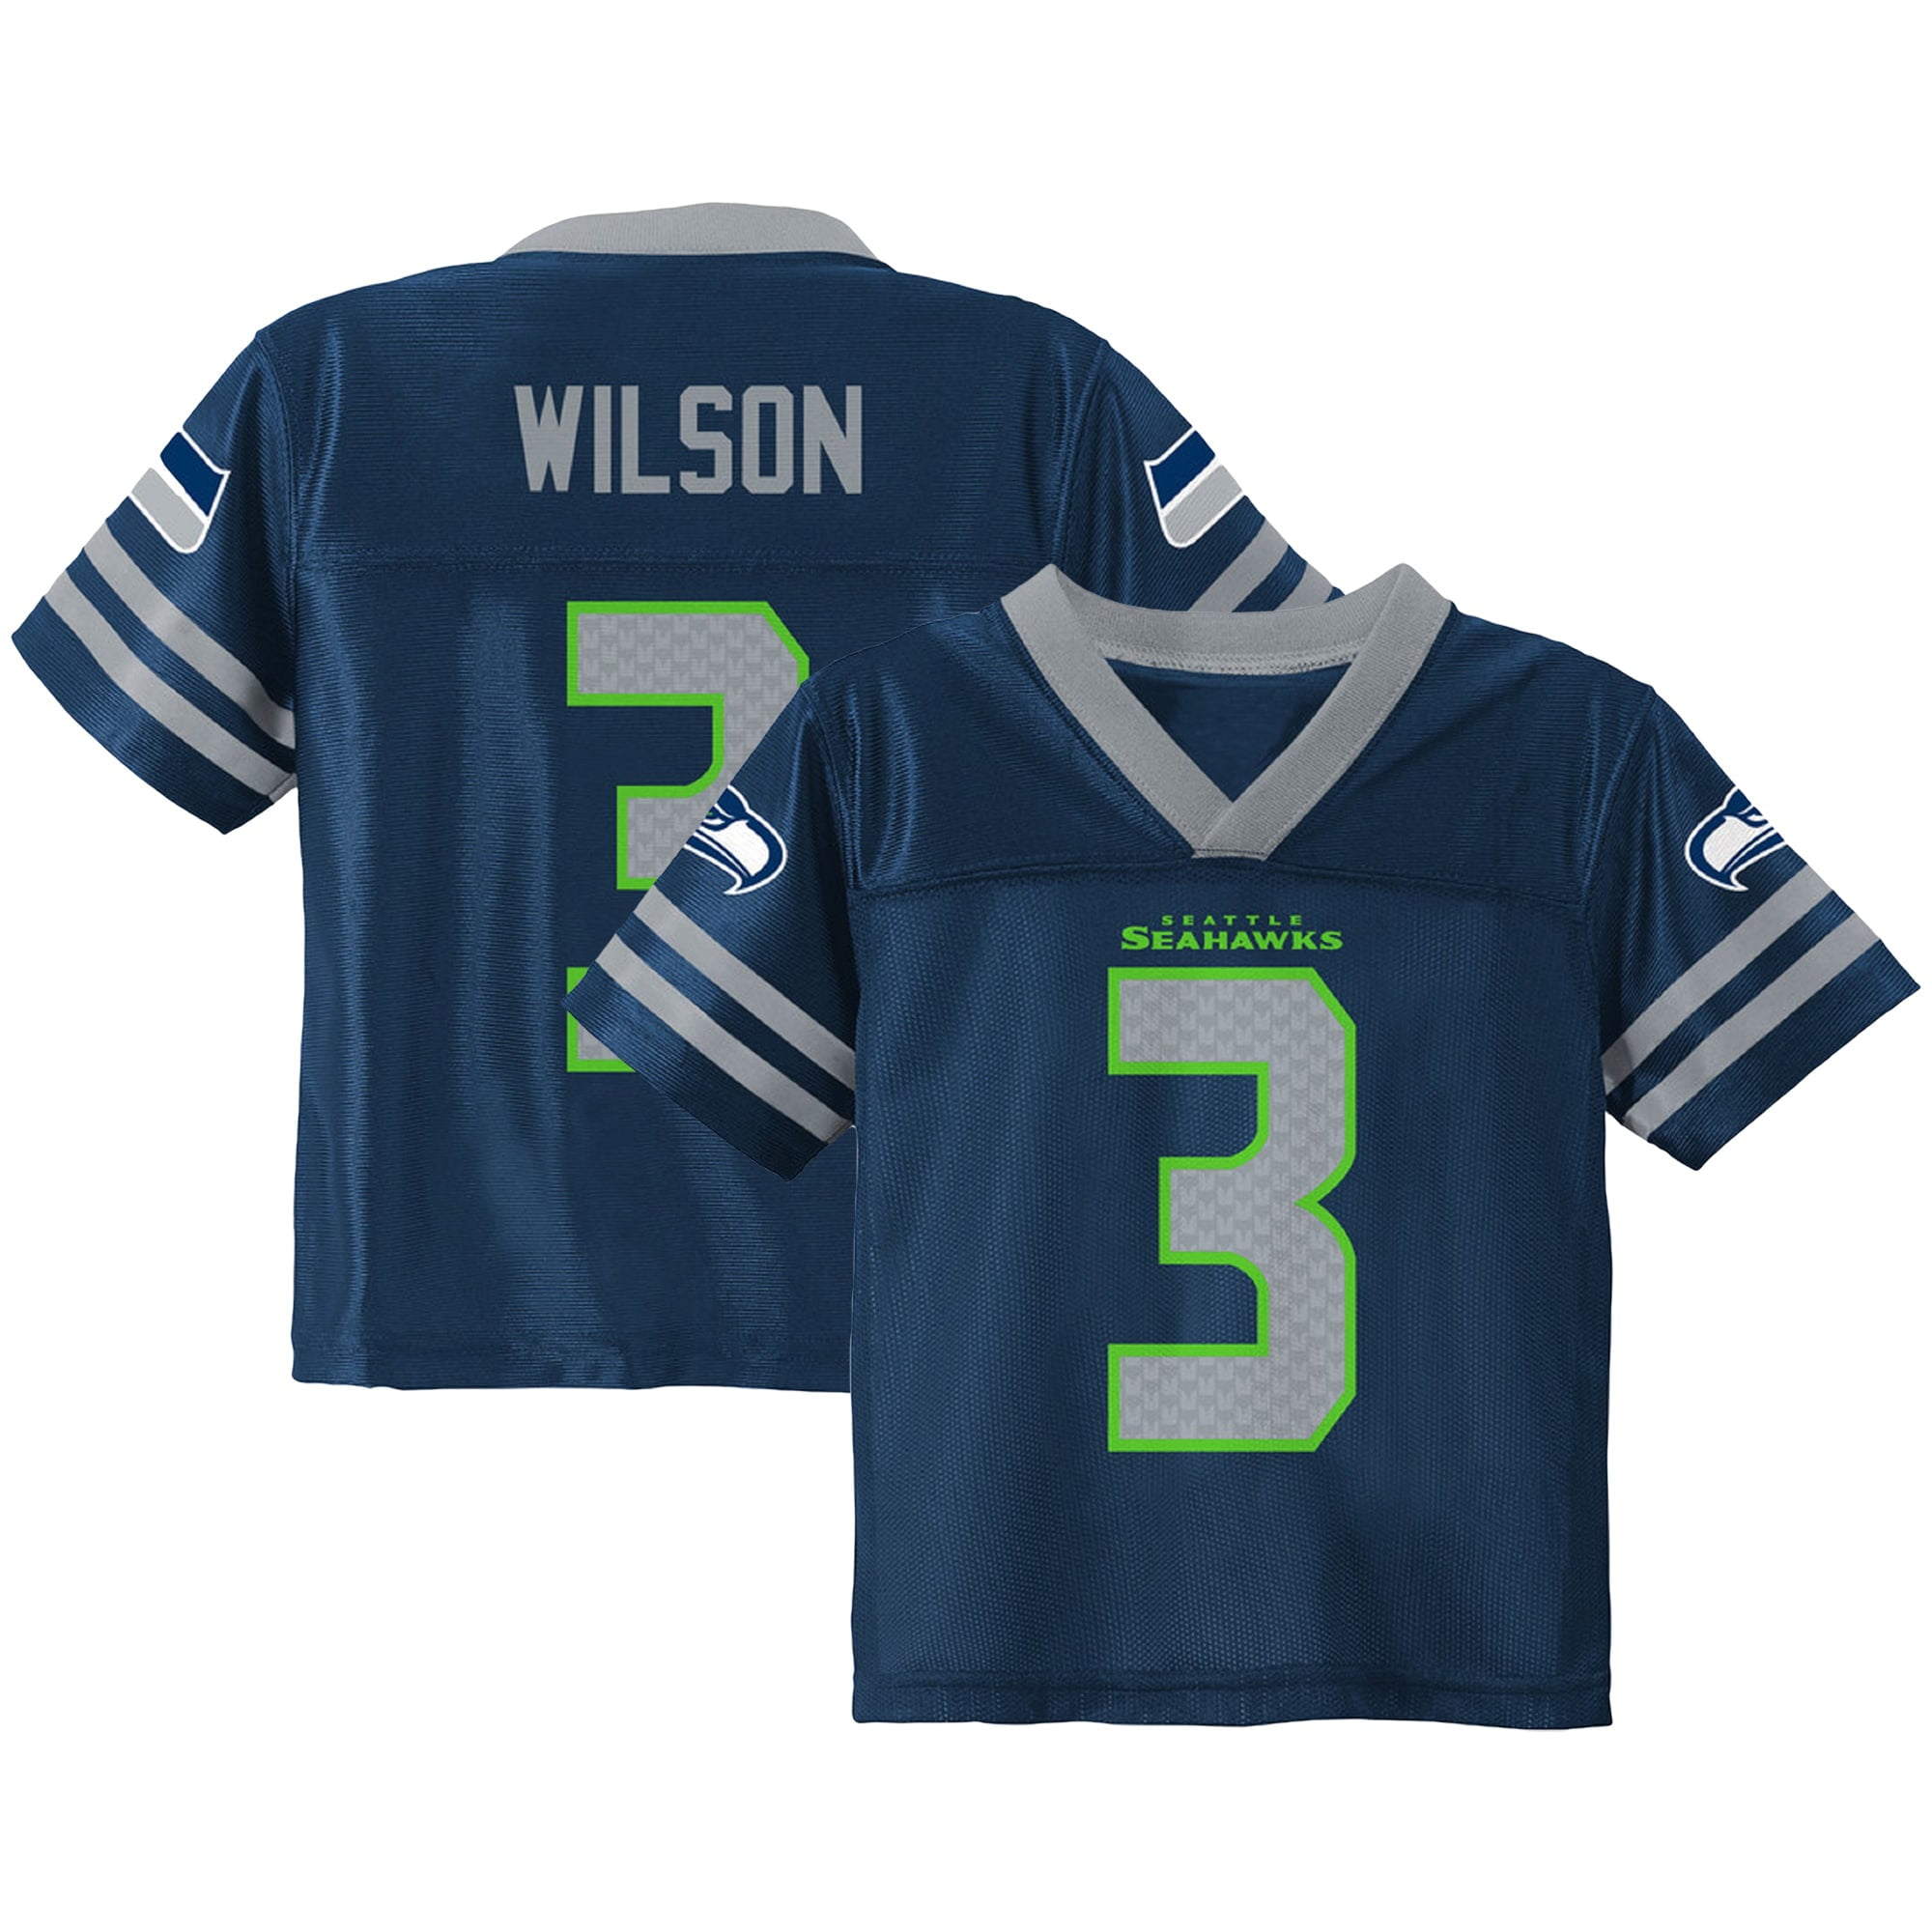 russell wilson jersey youth